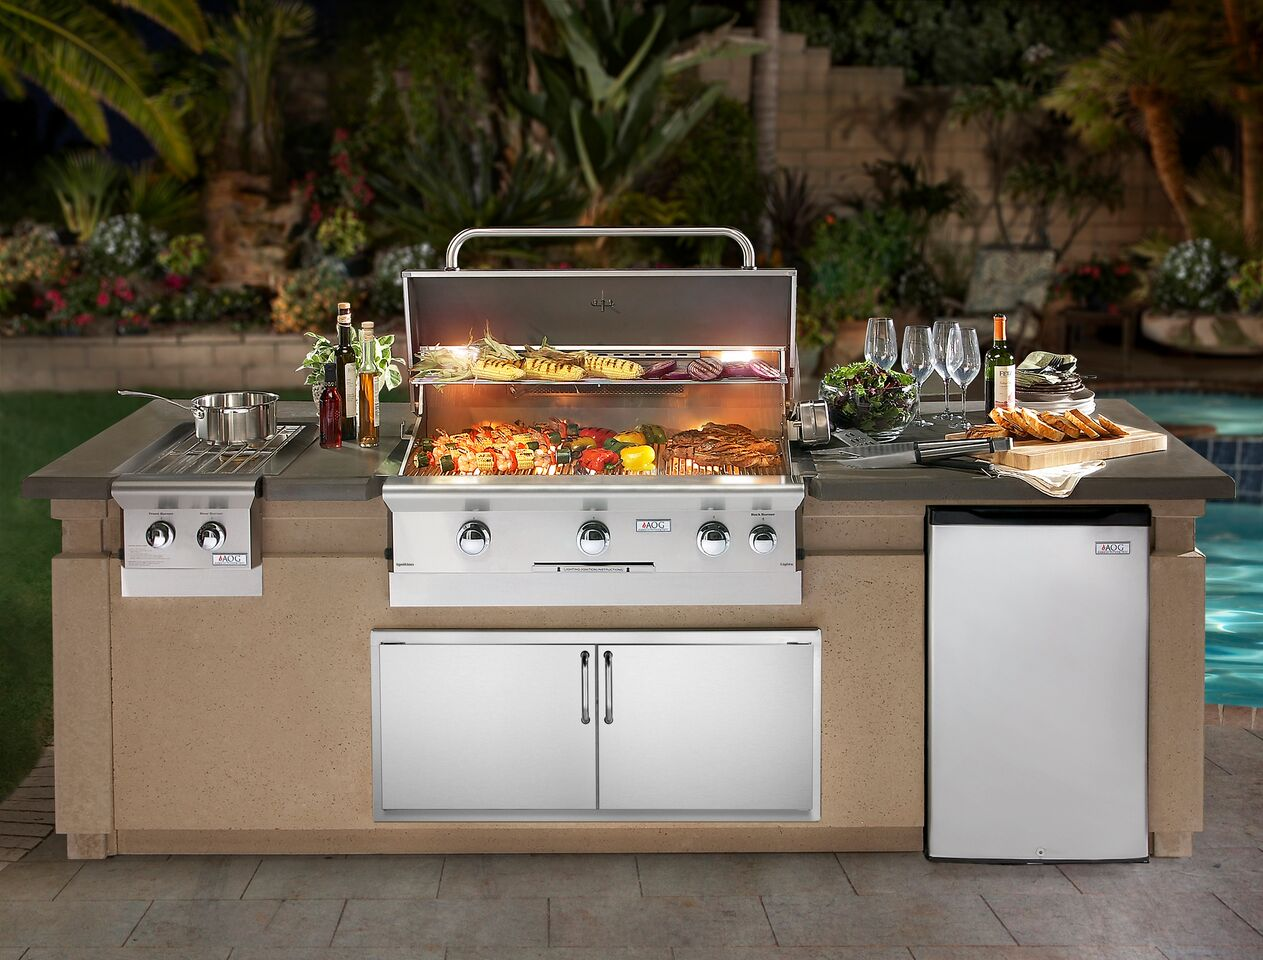 AOG DC790 Built-in Outdoor Grill by Fire Magic'